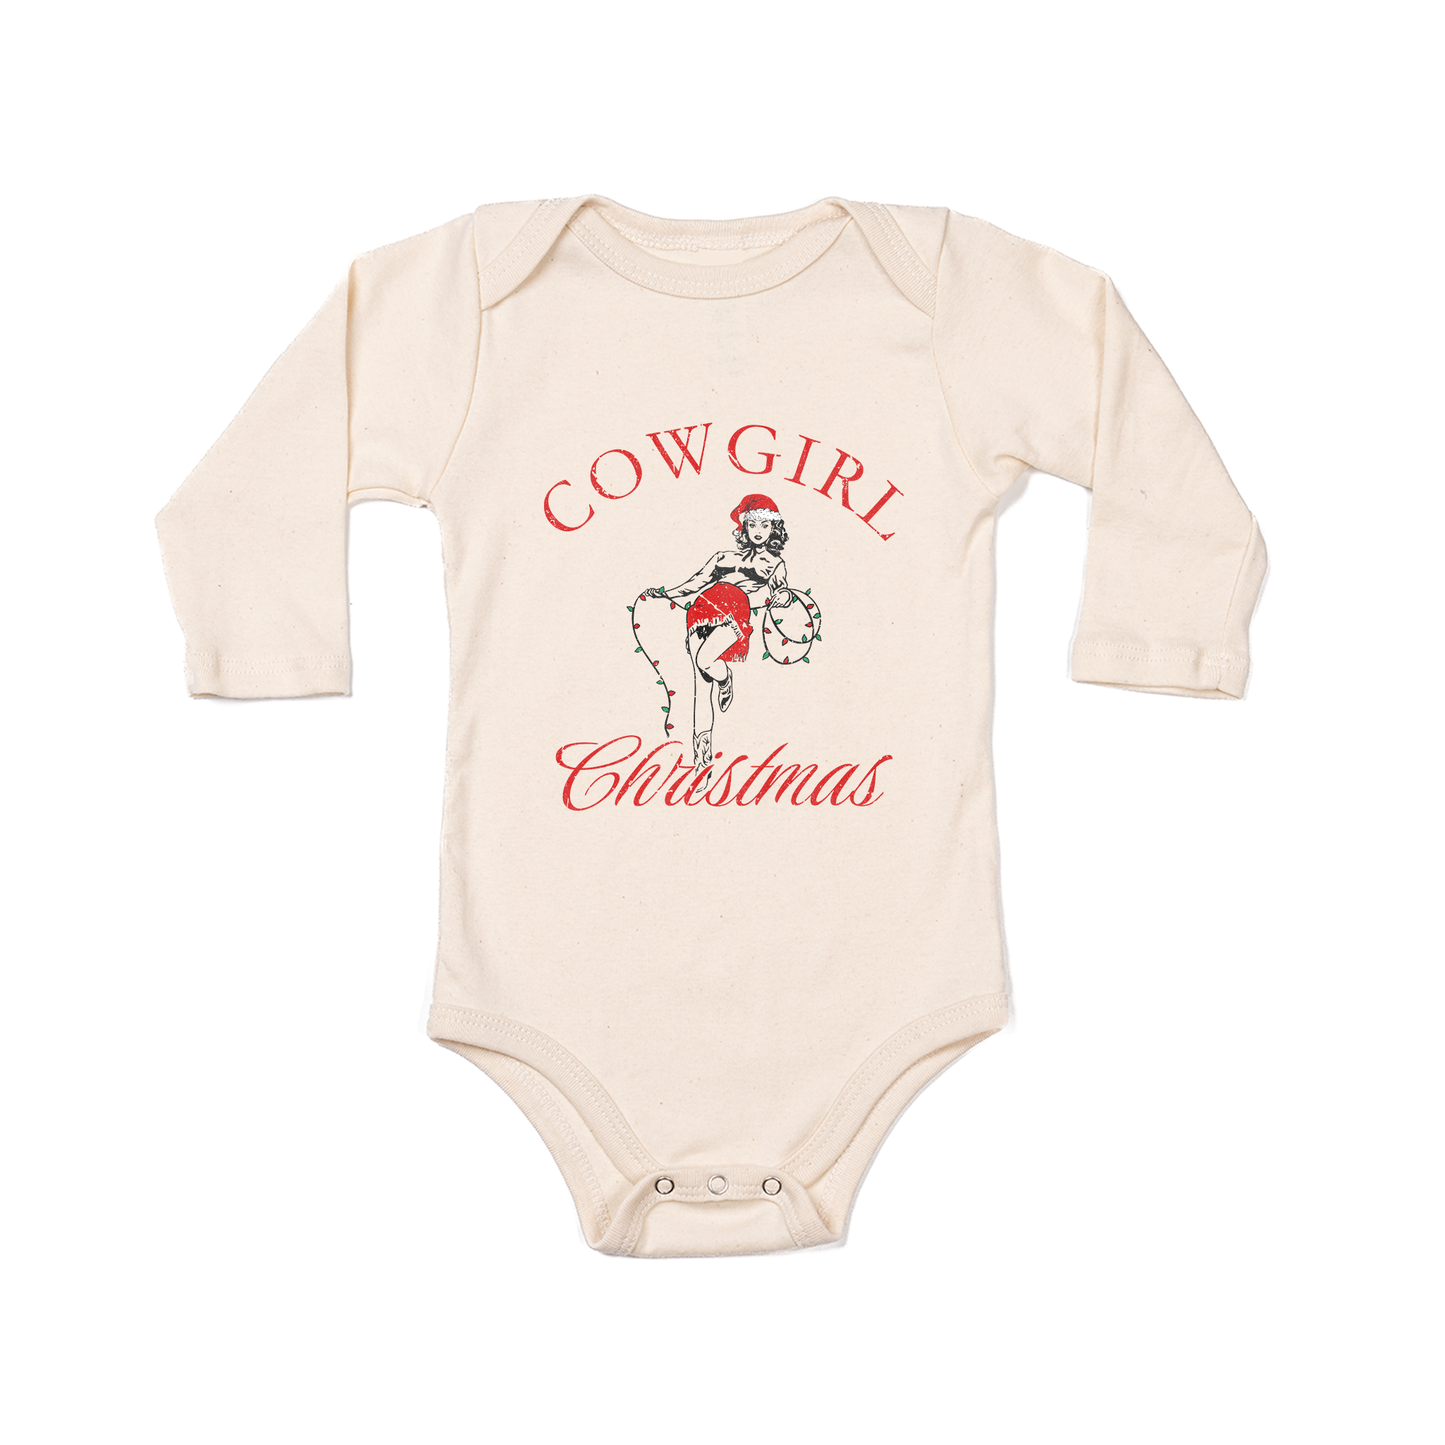 Cowgirl Christmas - Bodysuit (Natural, Long Sleeve)